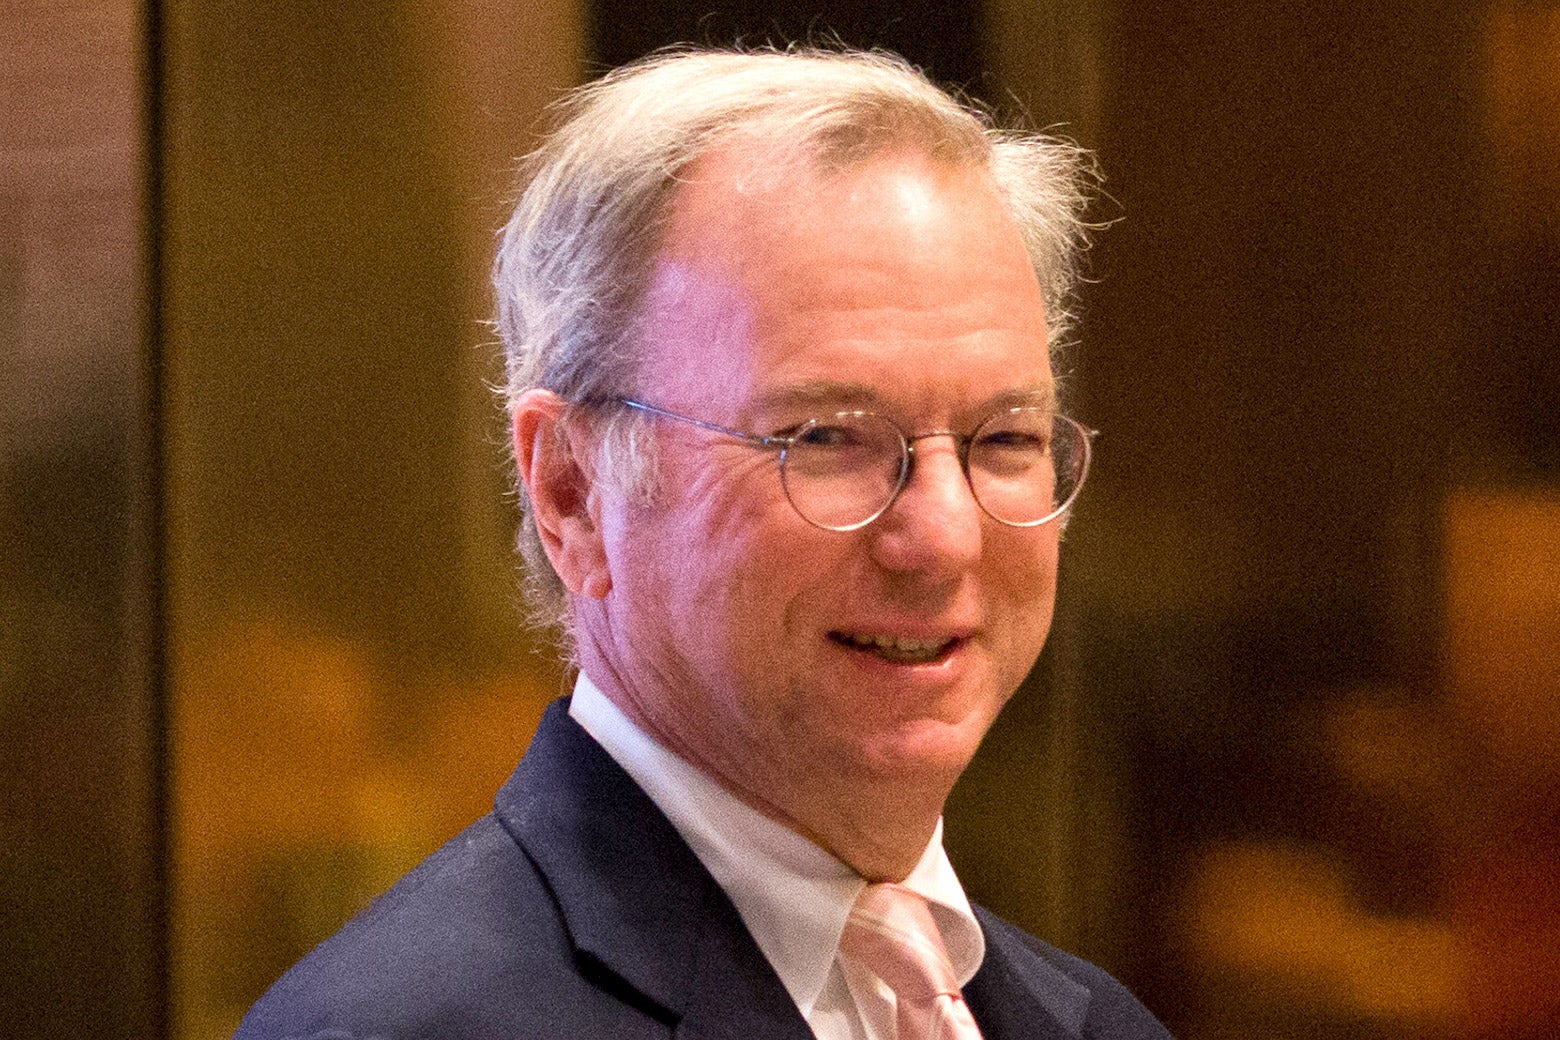 Eric Schmidt arrives in the lobby of Trump Tower in New York on Jan. 12, 2017.